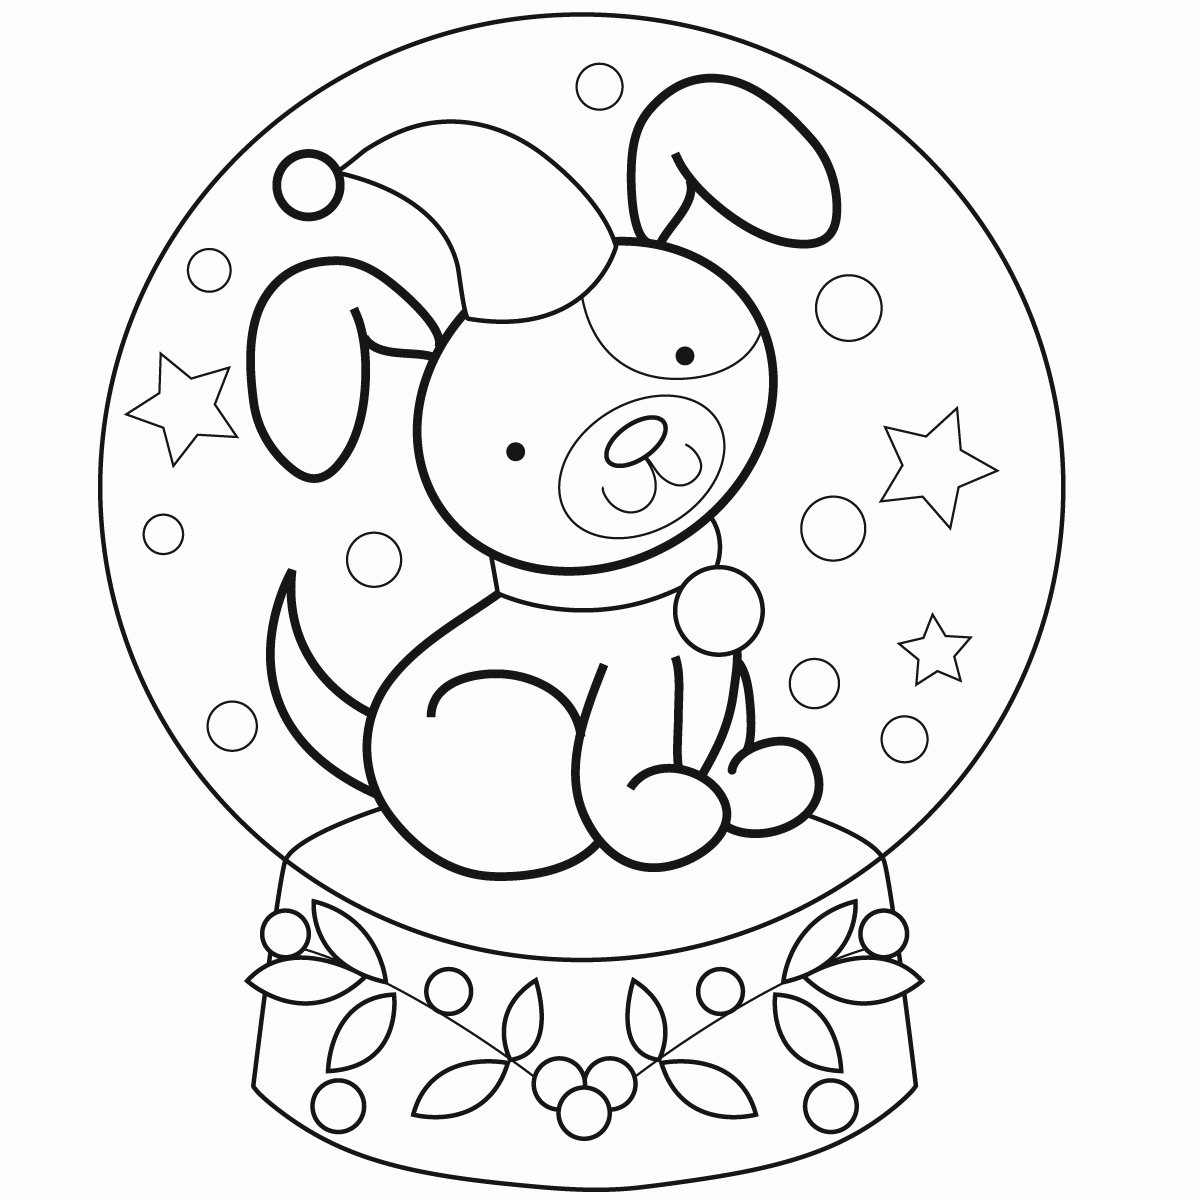 Little Boy Coloring Pages 20 Little Boy Coloring Pages Pictures Free Coloring Pages